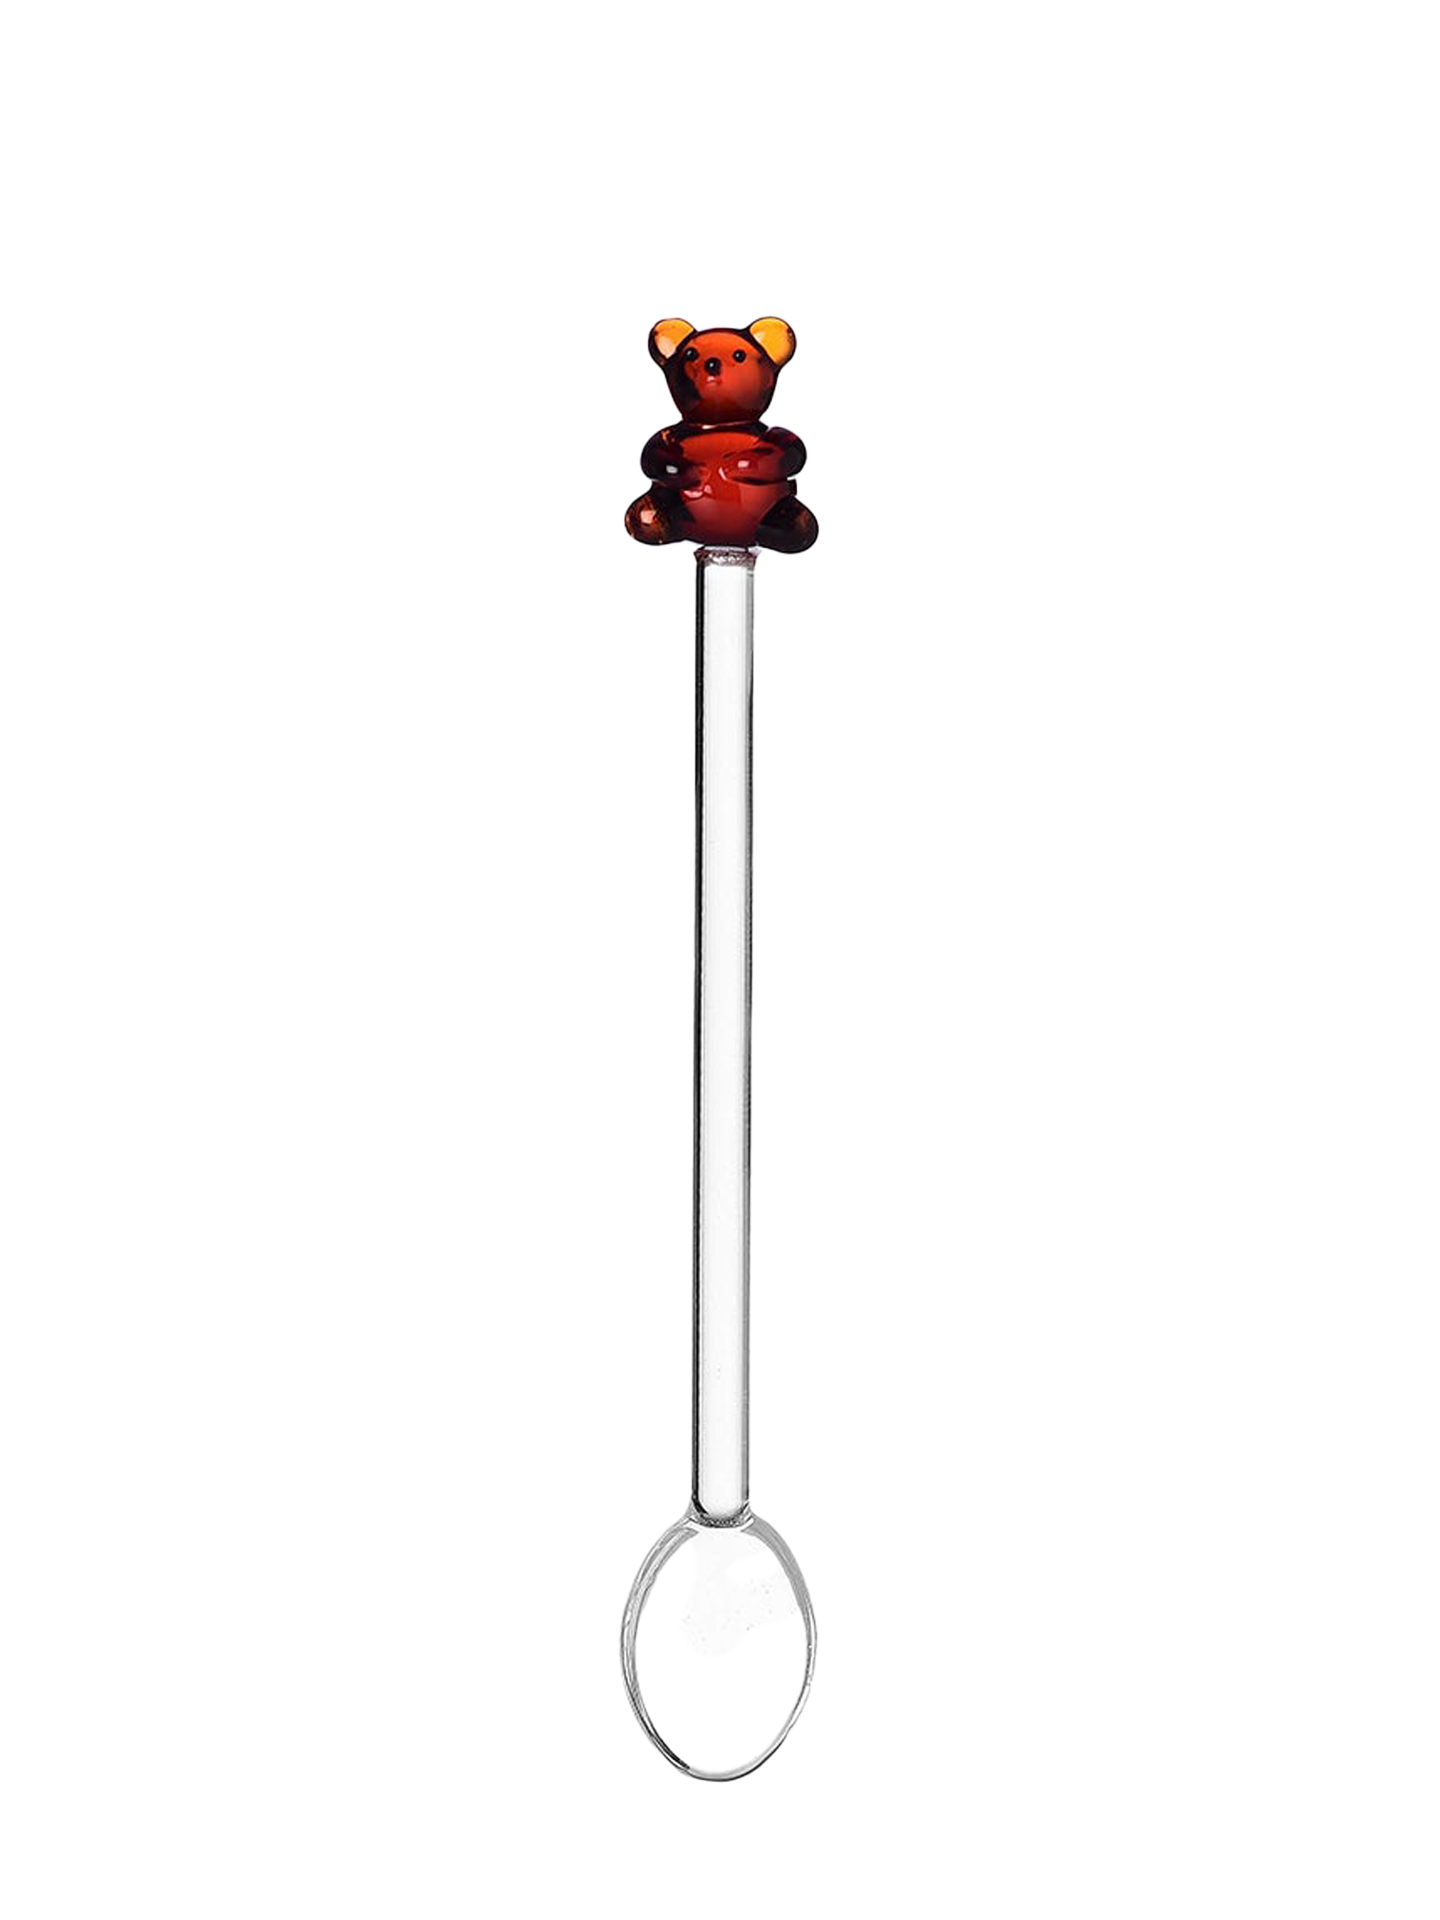 Bear Glass Spoon from Animal Farm Collection